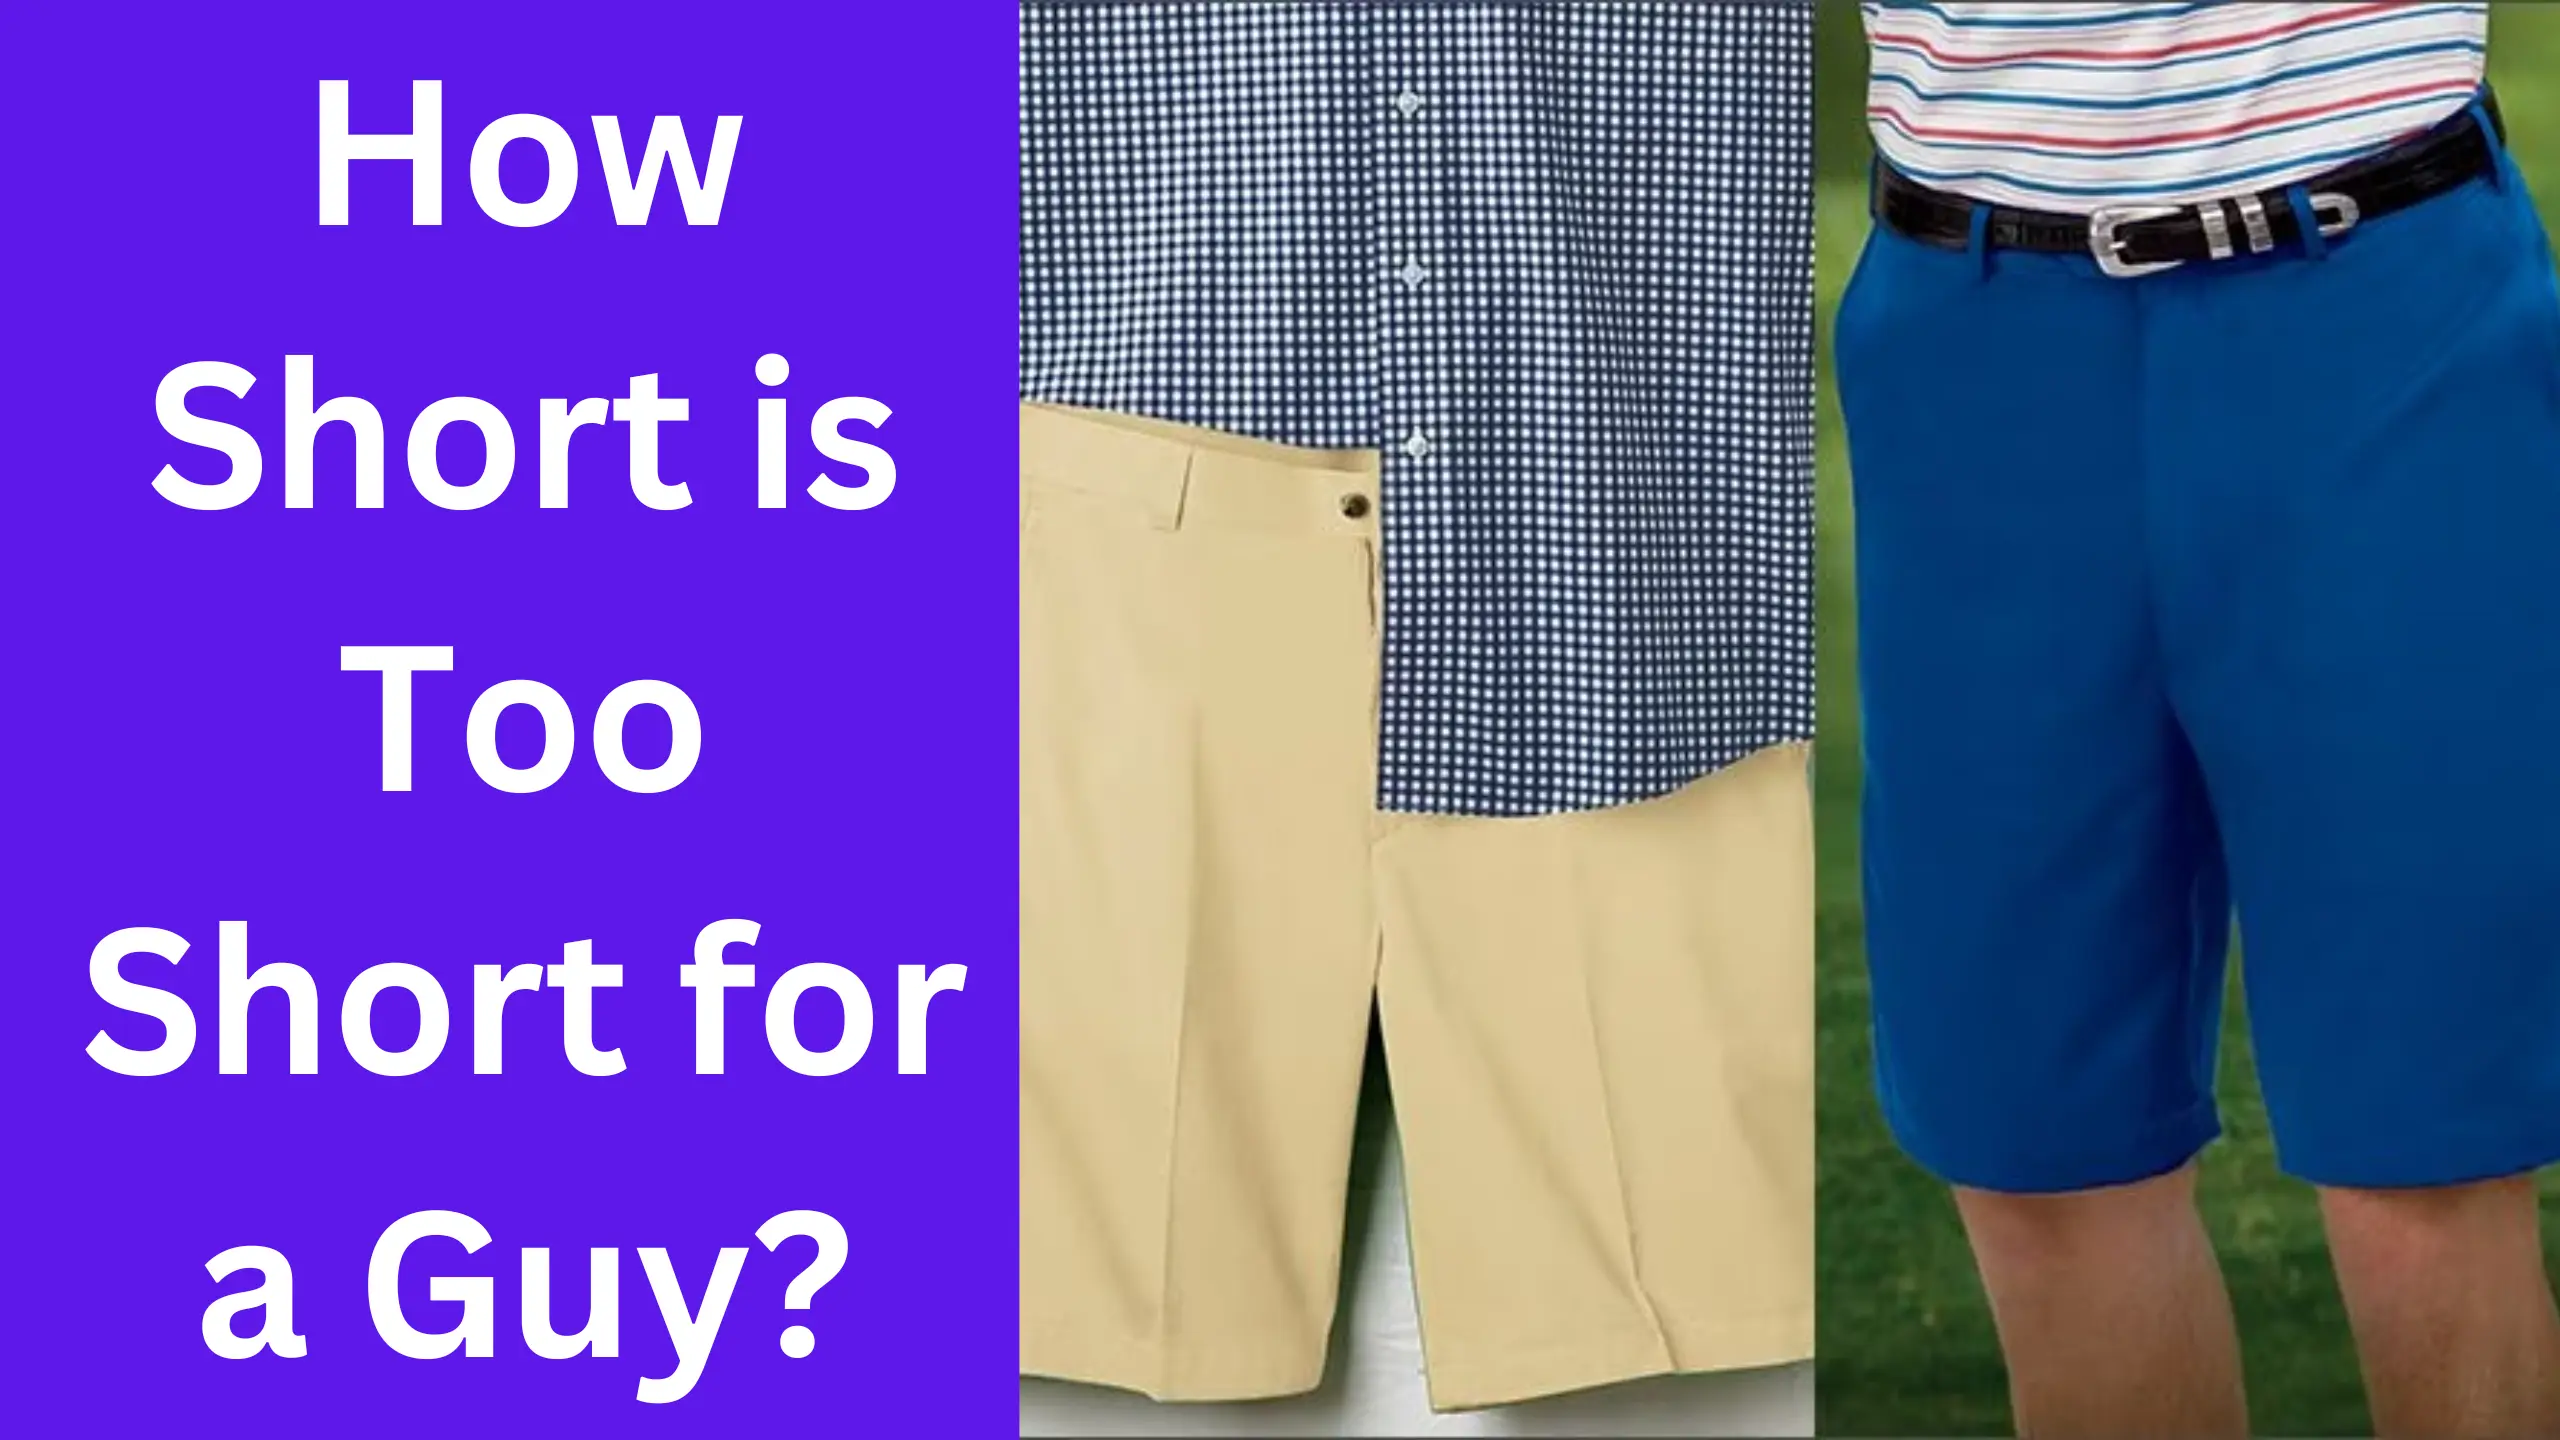 How Short is Too Short for a Guy